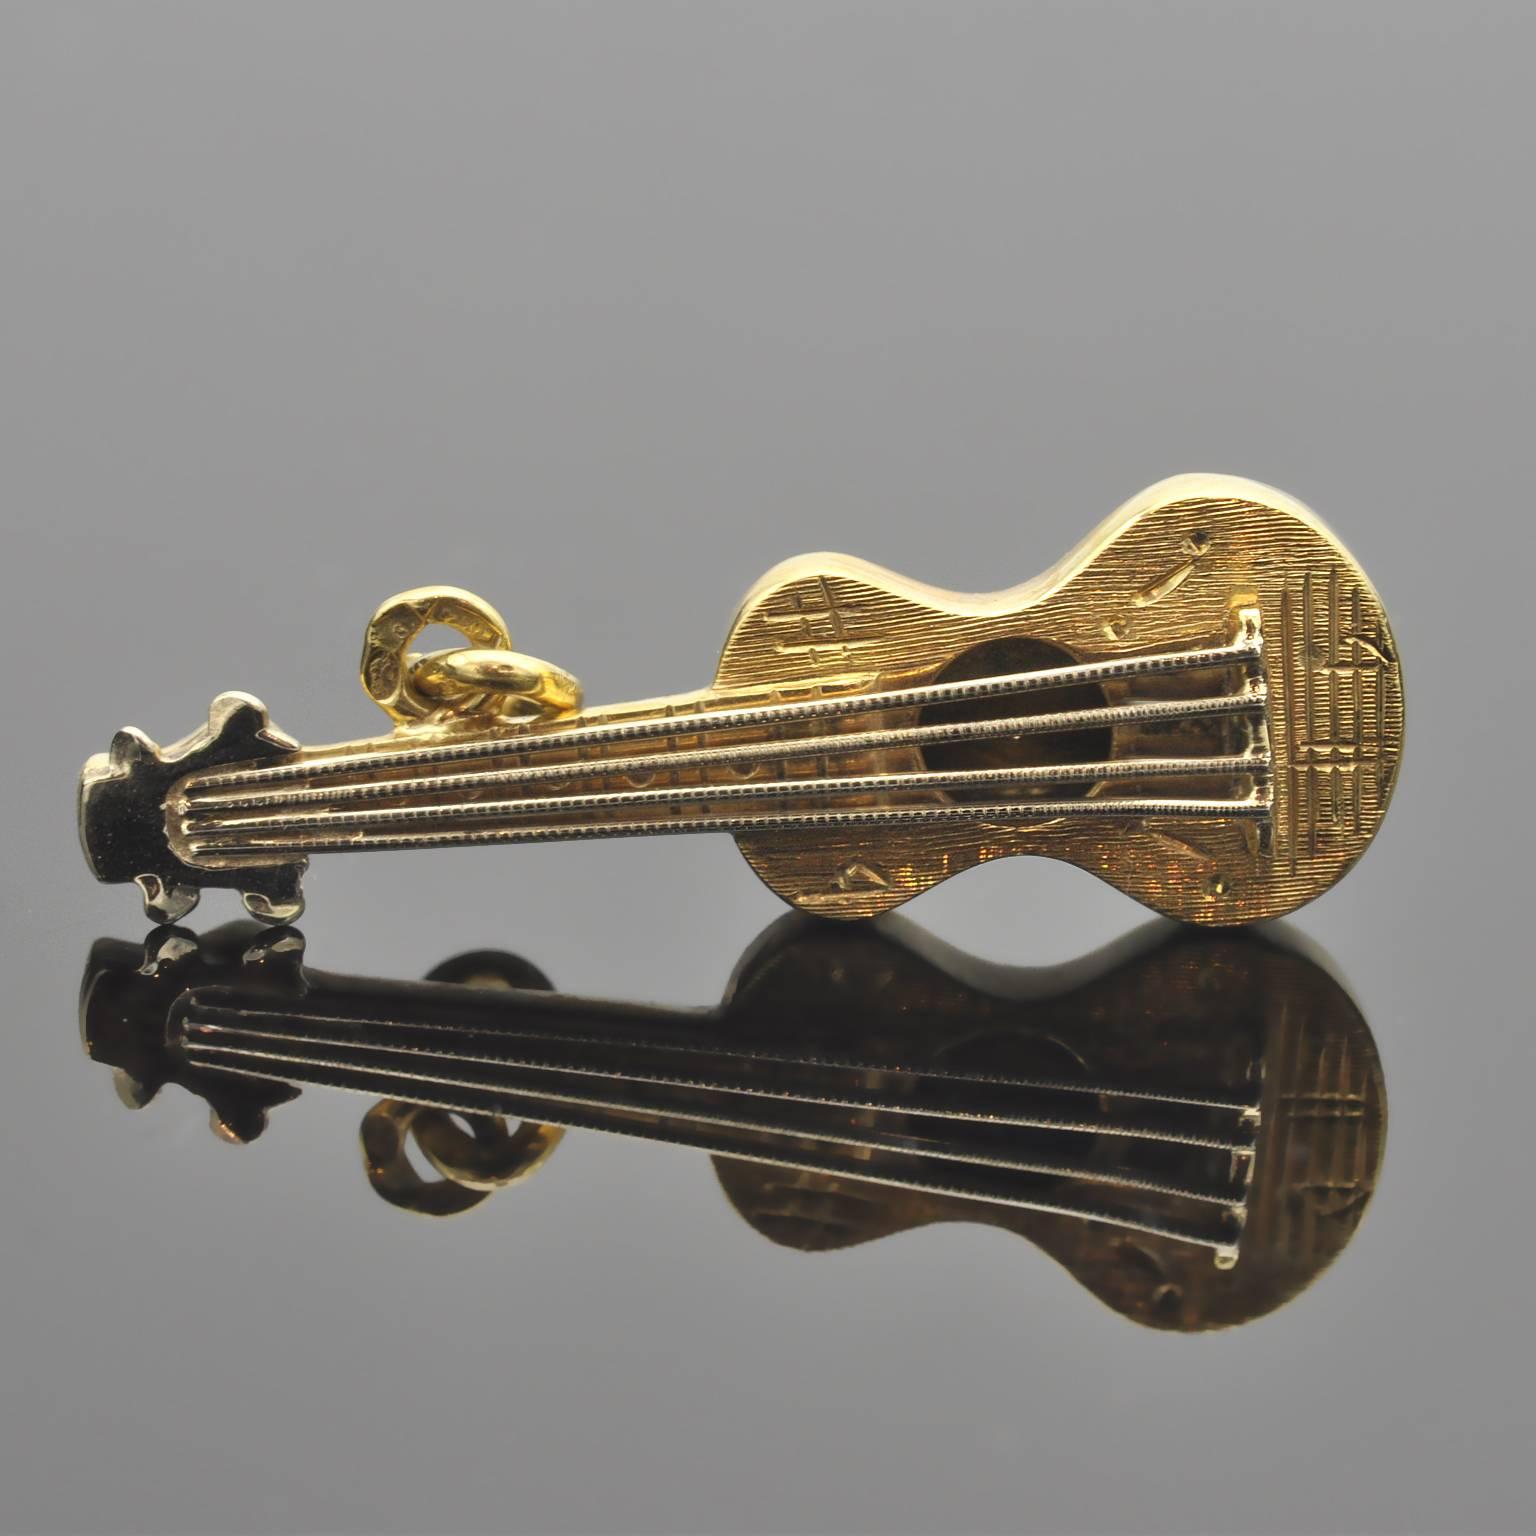 Exquisite 18 kt gold guitar pendant charm. The front is engraved with music notes while the back is polished. The guitar body is in yellow gold while the string and the head are in white gold.